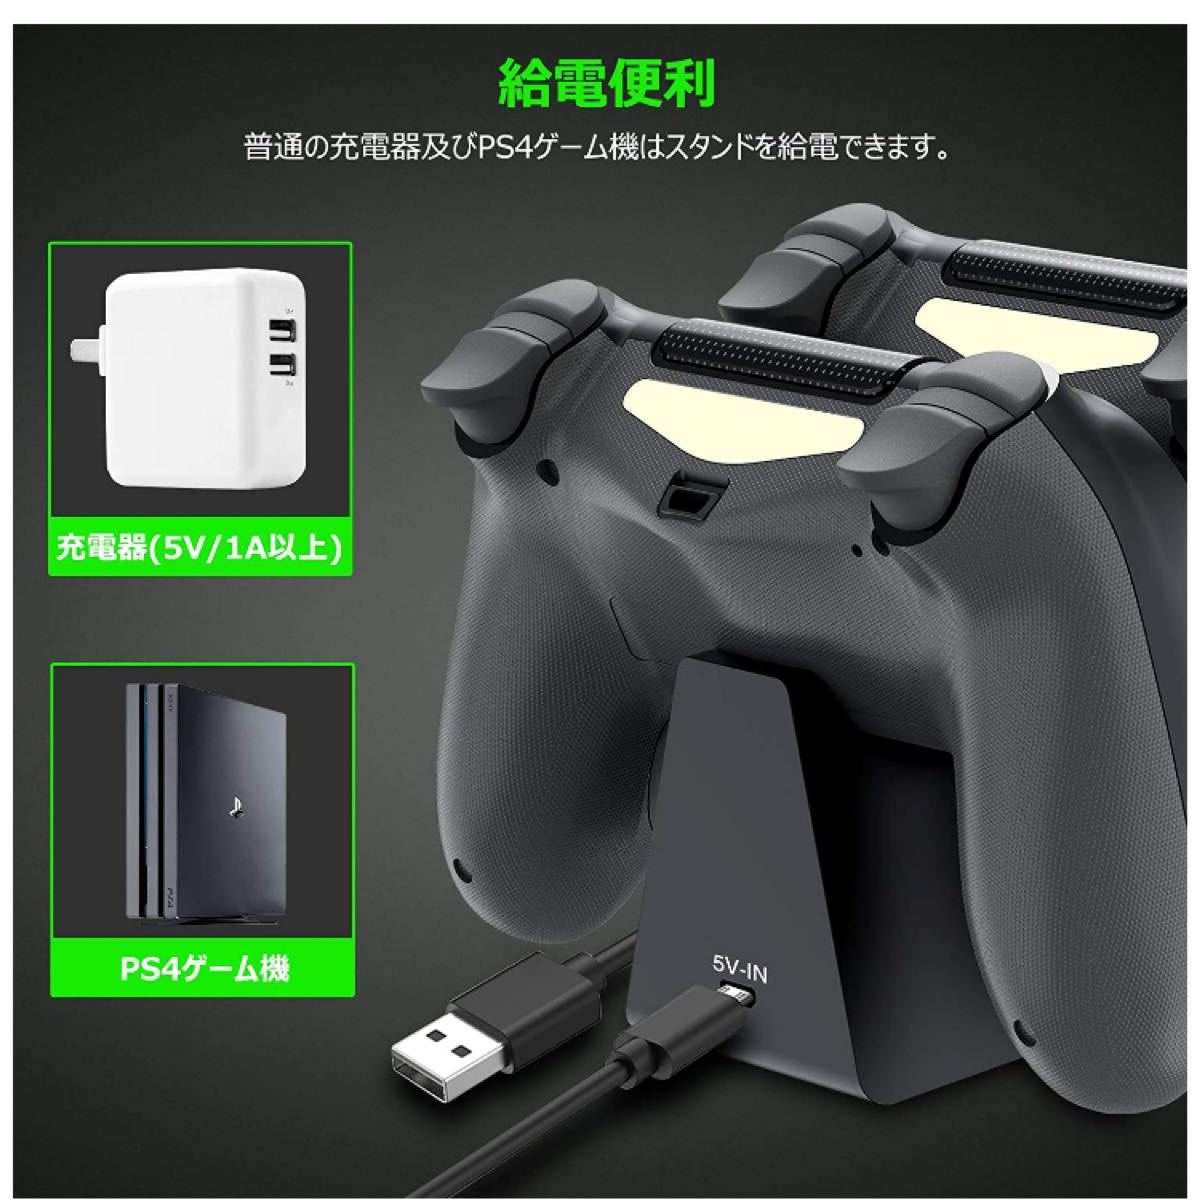 PS4 コントローラー充電器